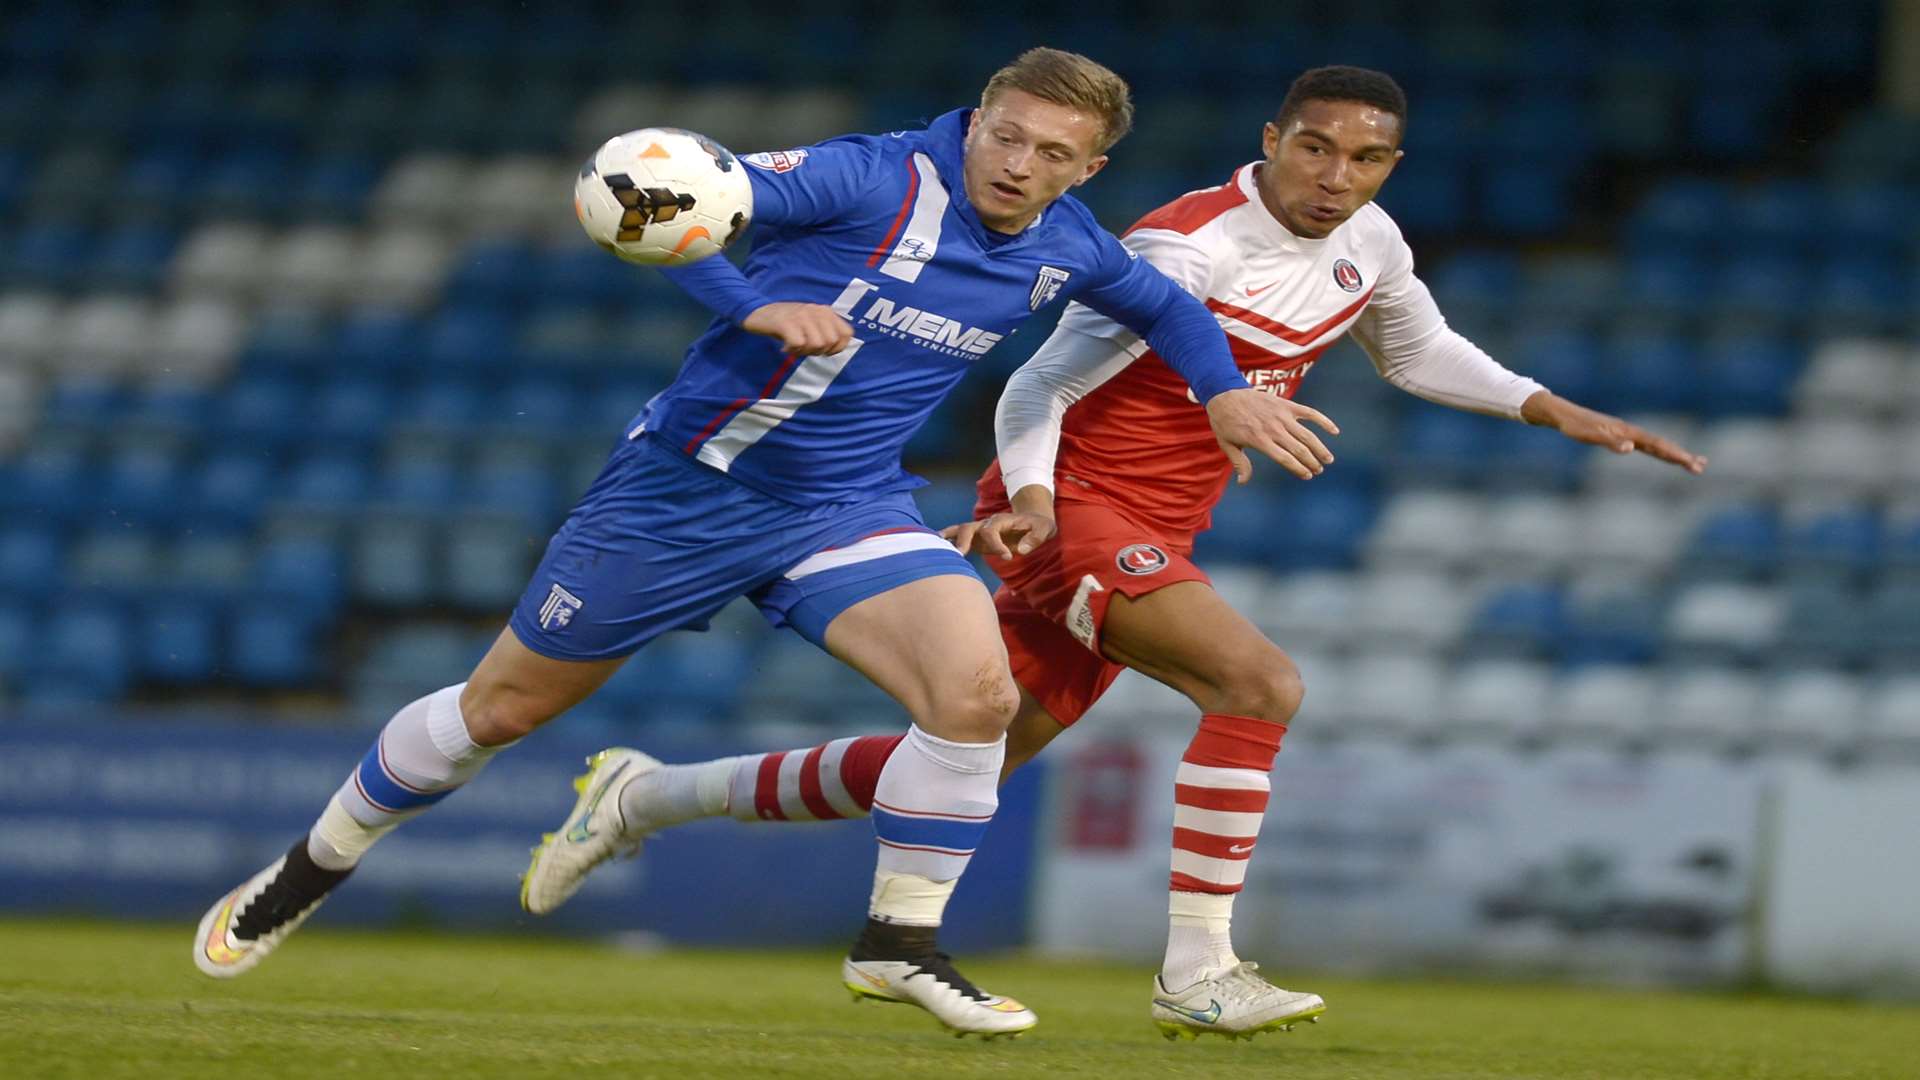 Luke Norris in action for Gills during last season's Kent Senior Cup final Picture: Barry Goodwin